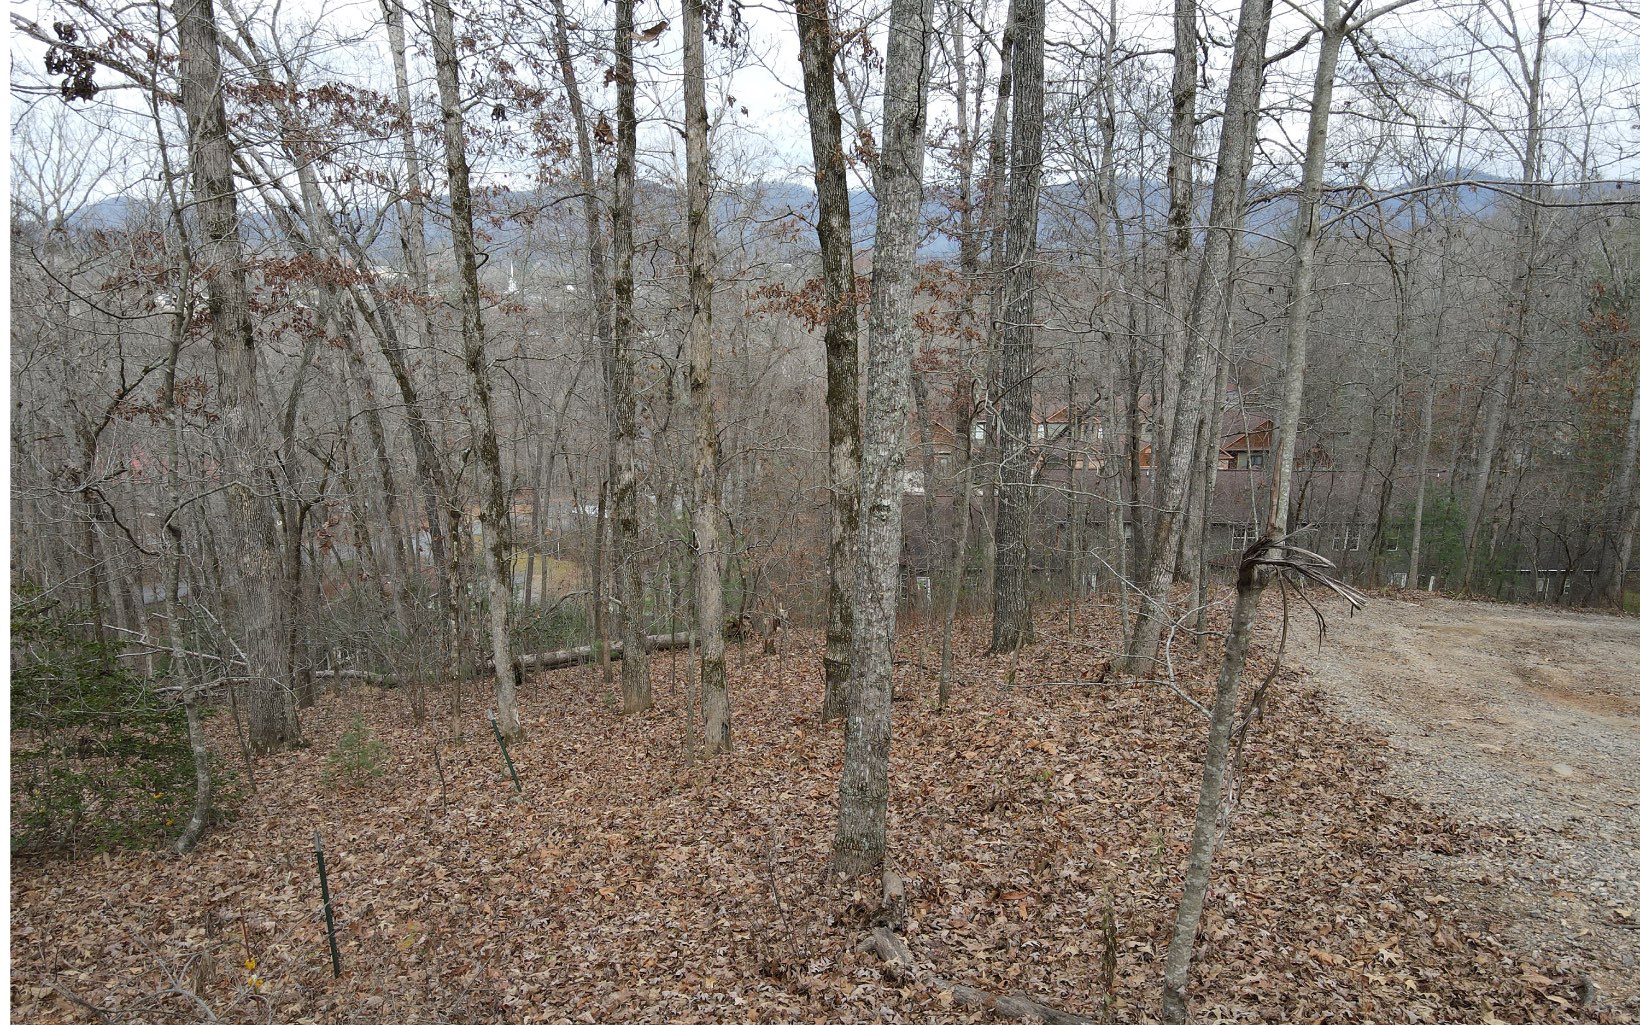 In Town Wooded Lot with Mountain Views that is Located ‘Just Outside City Limits' but the Lot Offers City Water, City Sewer, Internet & Electric Availability. Great Price on this 0.48 Acre Wooded Lot with Mountain Views. Just Minutes to Downtown Blairsville. New Survey. Perk test is NOT required since the Lot has Access to City Sewer. *Older Restrictions Recorded in place and the buyer’s attorney can Verify if they are still Active or if they have Expired. Fabulous Deal on this Easy Access Lot.Great In-Town Location! Only a Short Drive to Vogel State Park, Lake Nottely and Appalachian Trail.